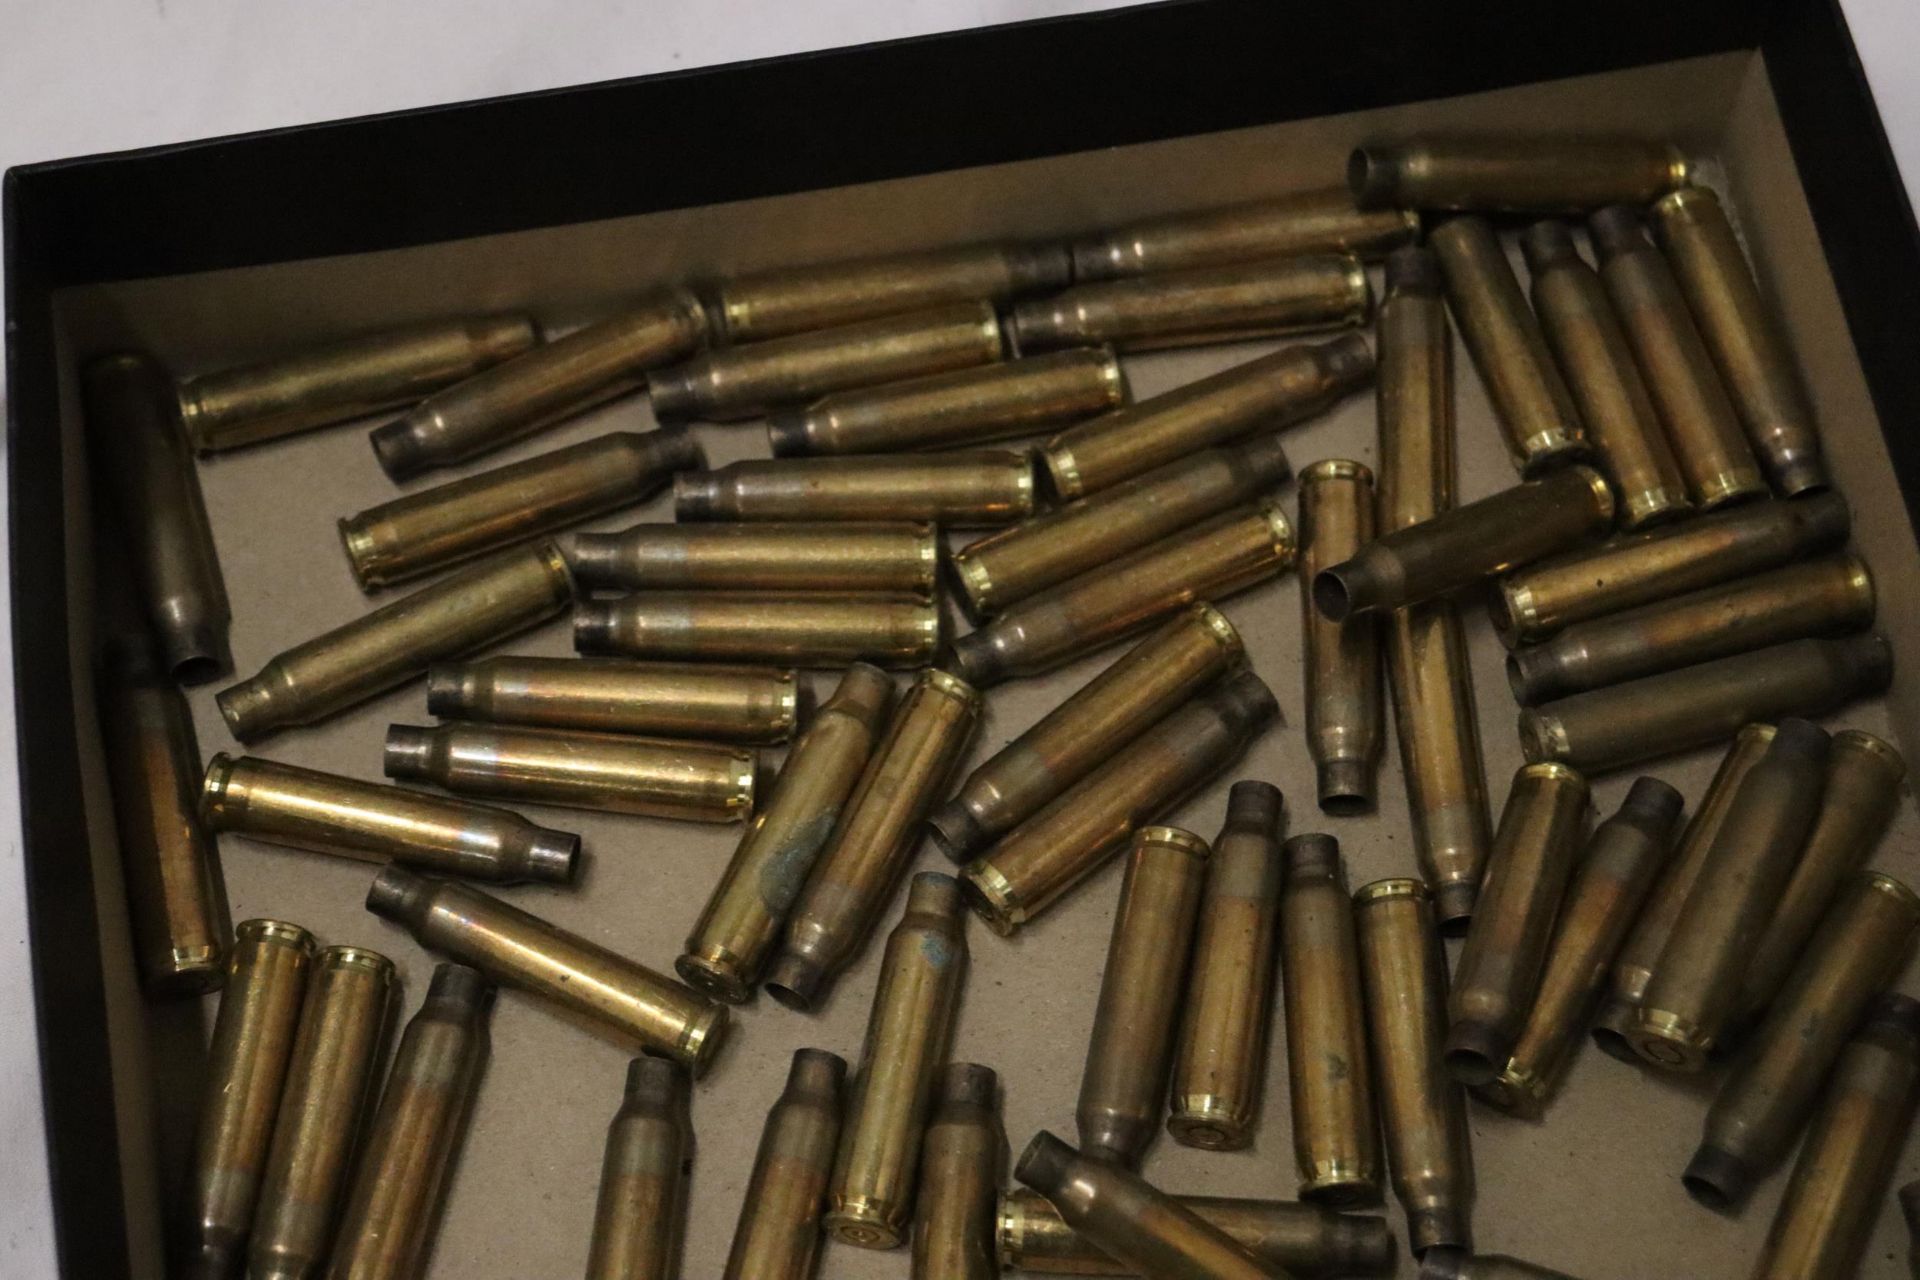 A QUANTITY OF OVER 100 BRASS BULLET CASINGS - Image 2 of 4